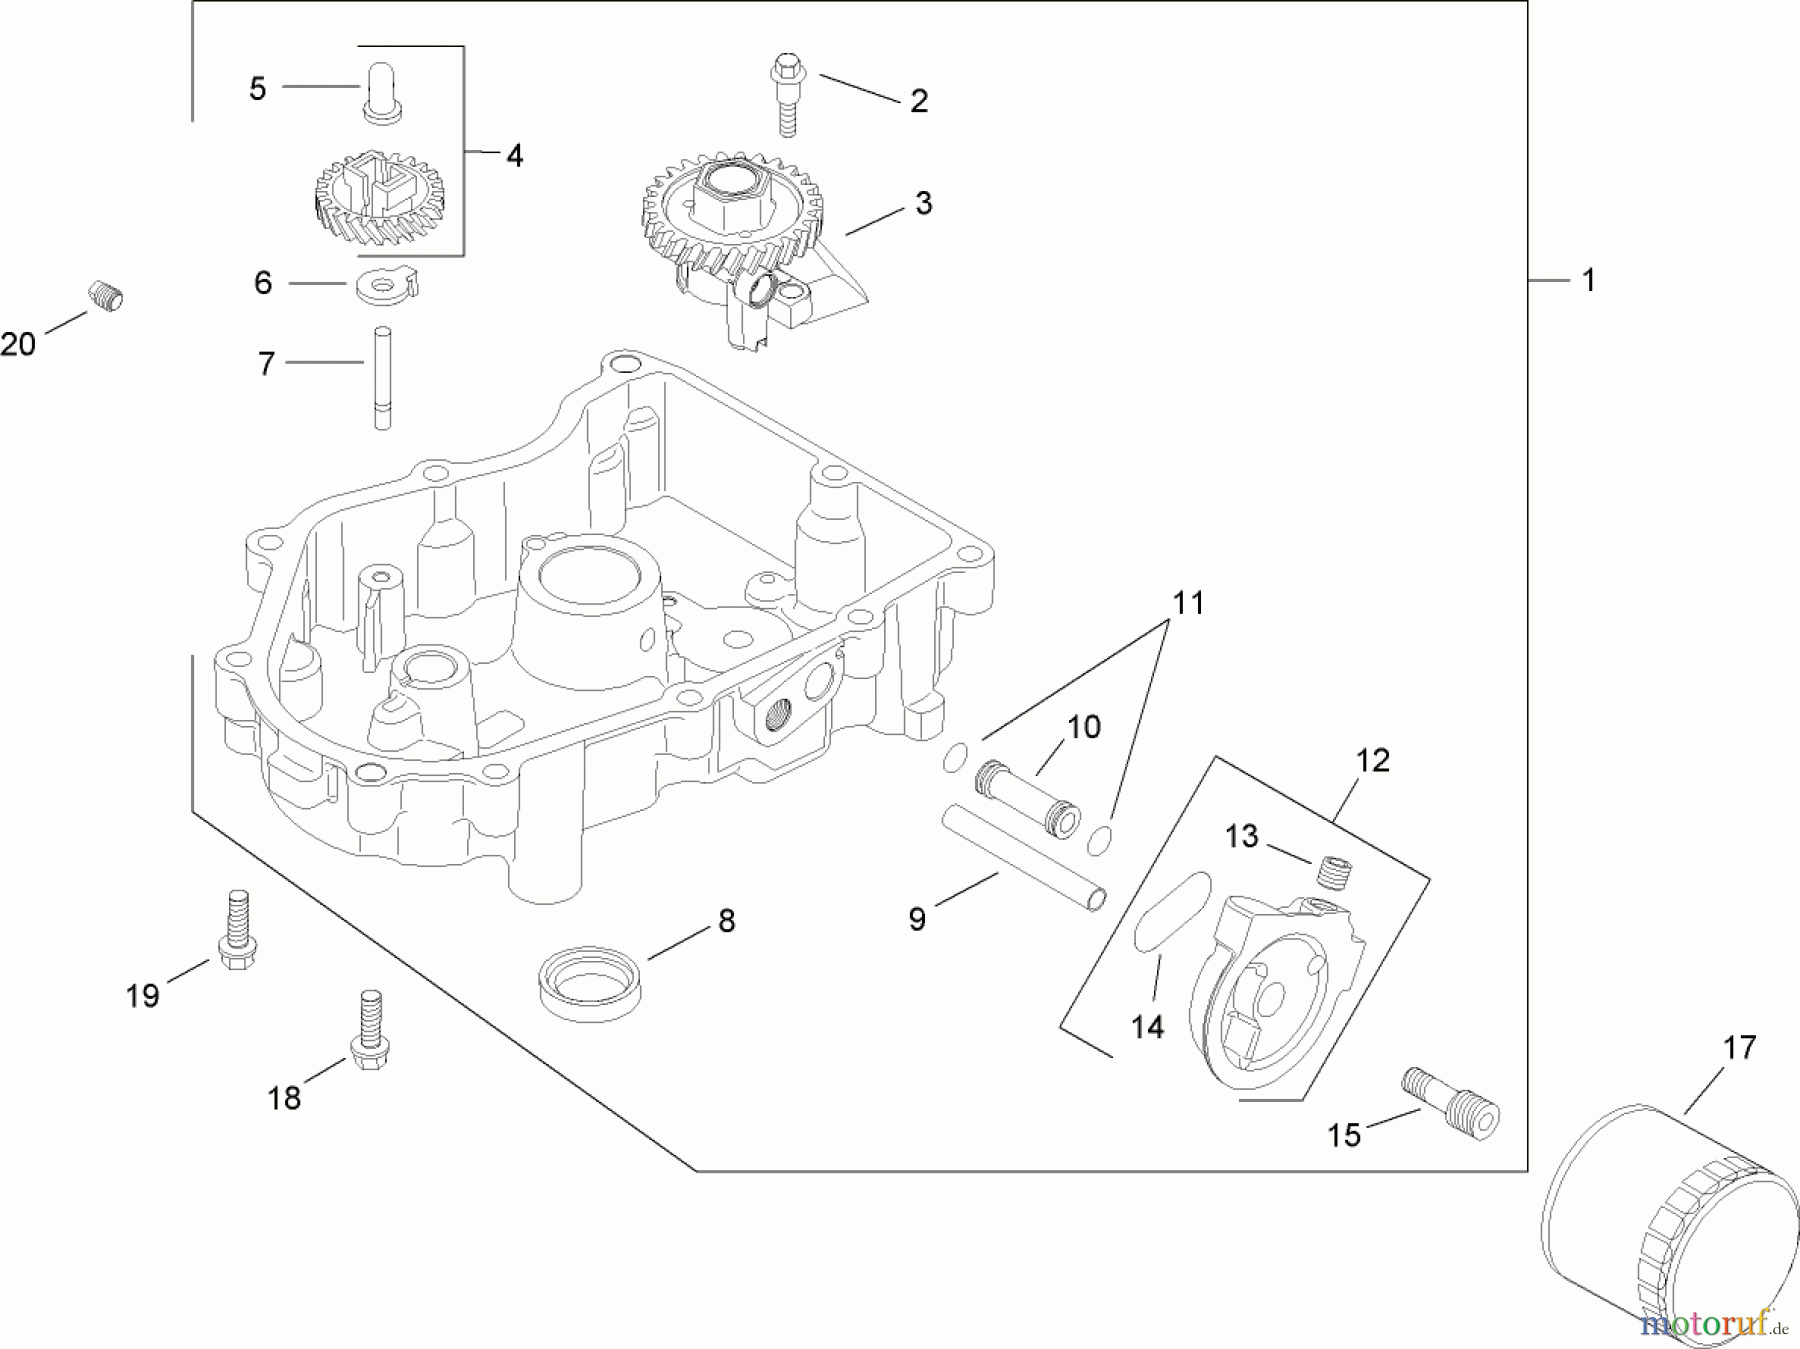  Toro Neu Mowers, Lawn & Garden Tractor Seite 1 13AP60RP544 (LX500) - Toro LX500 Lawn Tractor, 2006 (1A056B50000-) OIL PAN AND LUBRICATION ASSEMBLY KOHLER SV720-0011